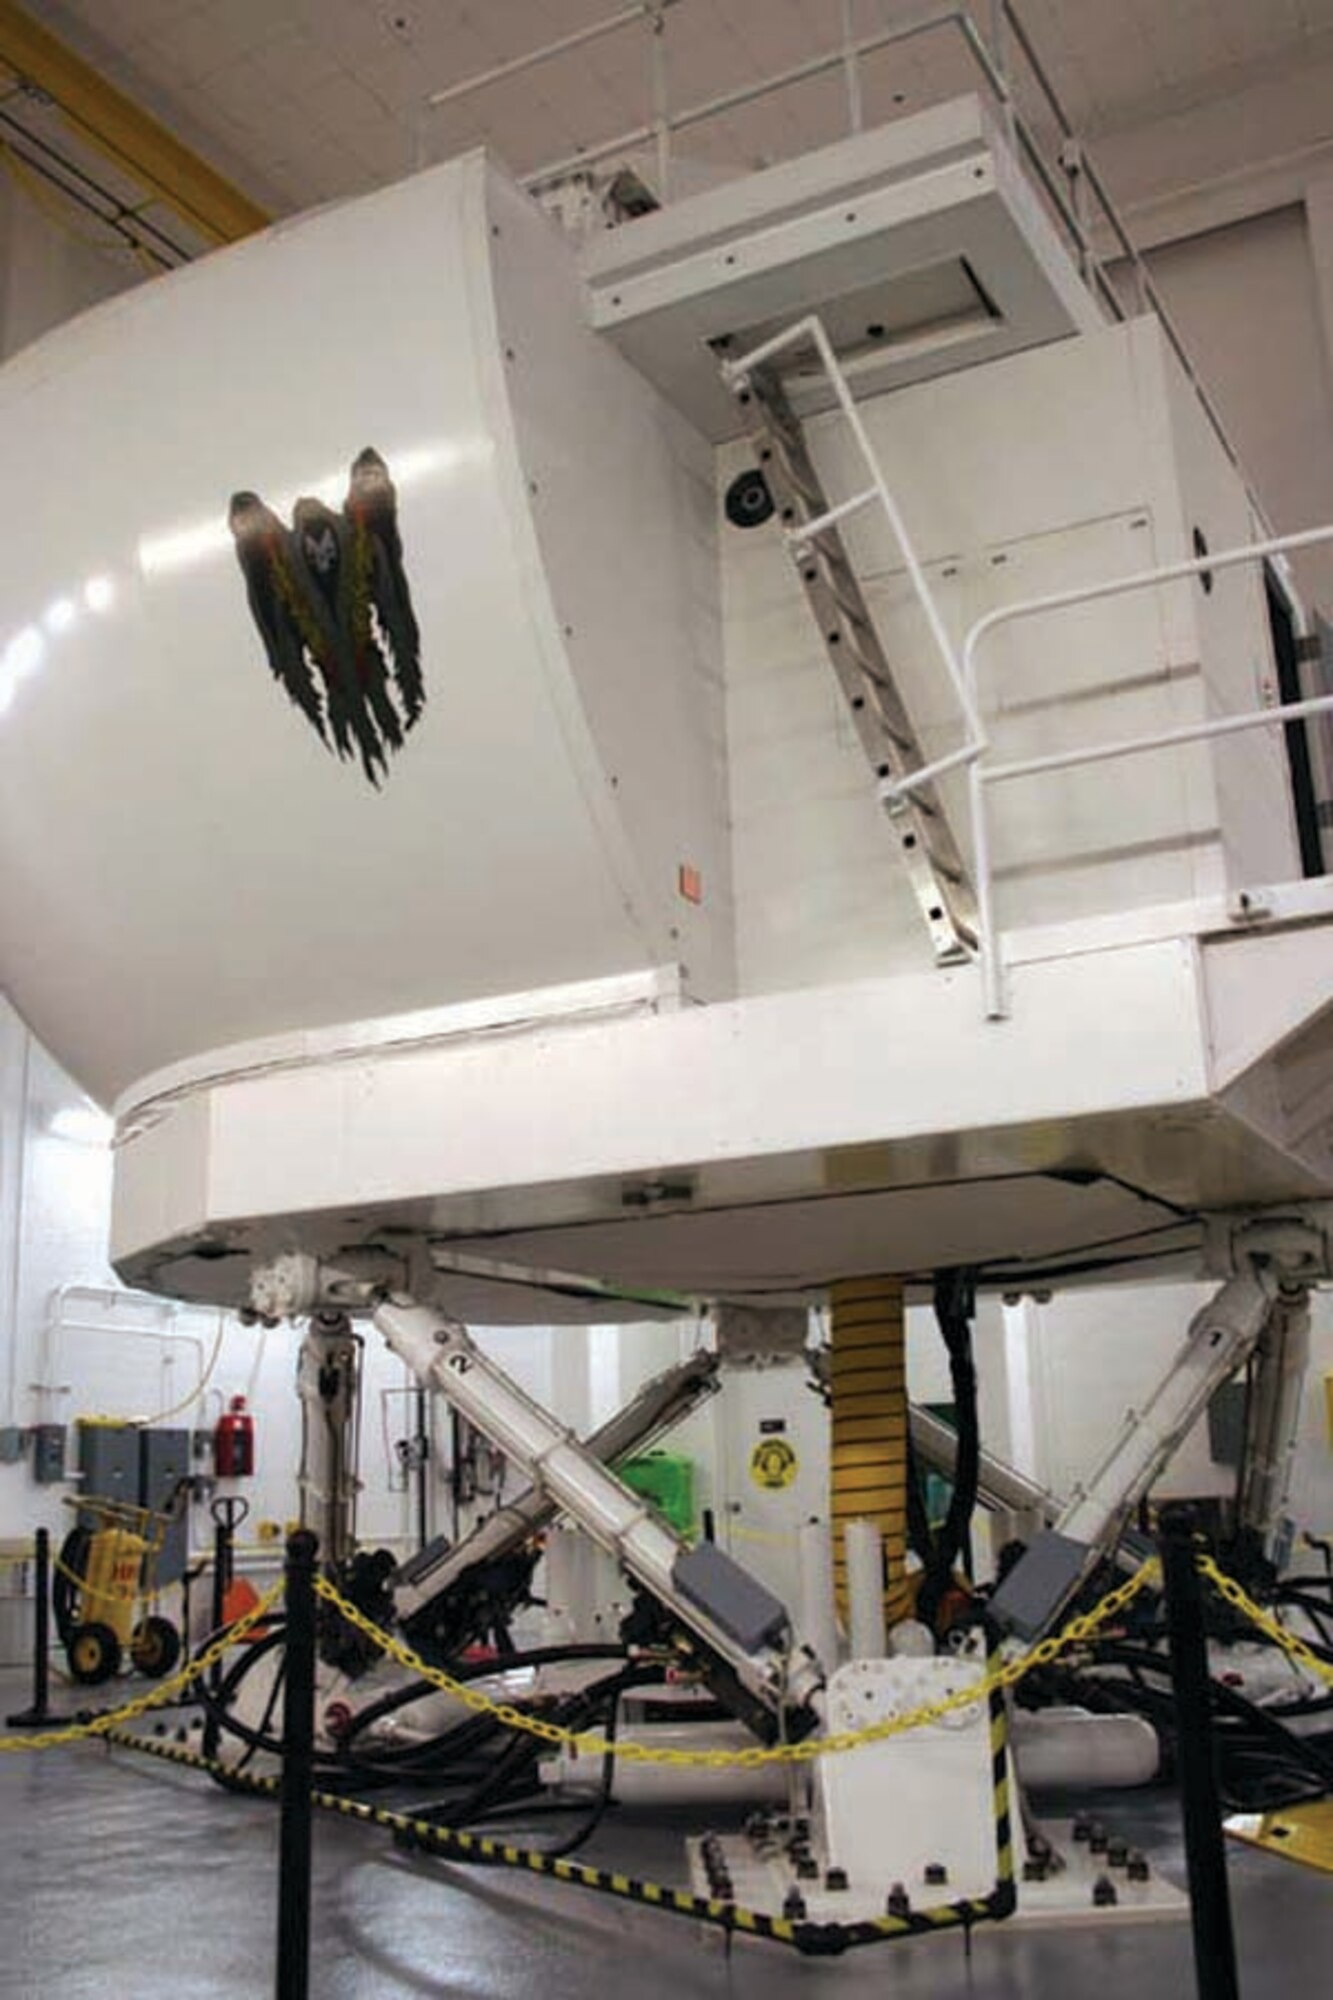 The MC-130 simulator is one of many units located inside the 19th SOS. The squadron has the capabilities of linking their simulators with other Department of Defense and coalition units worldwide. (U.S. Air Force photo by 2nd Lt. Lauren Johnson)